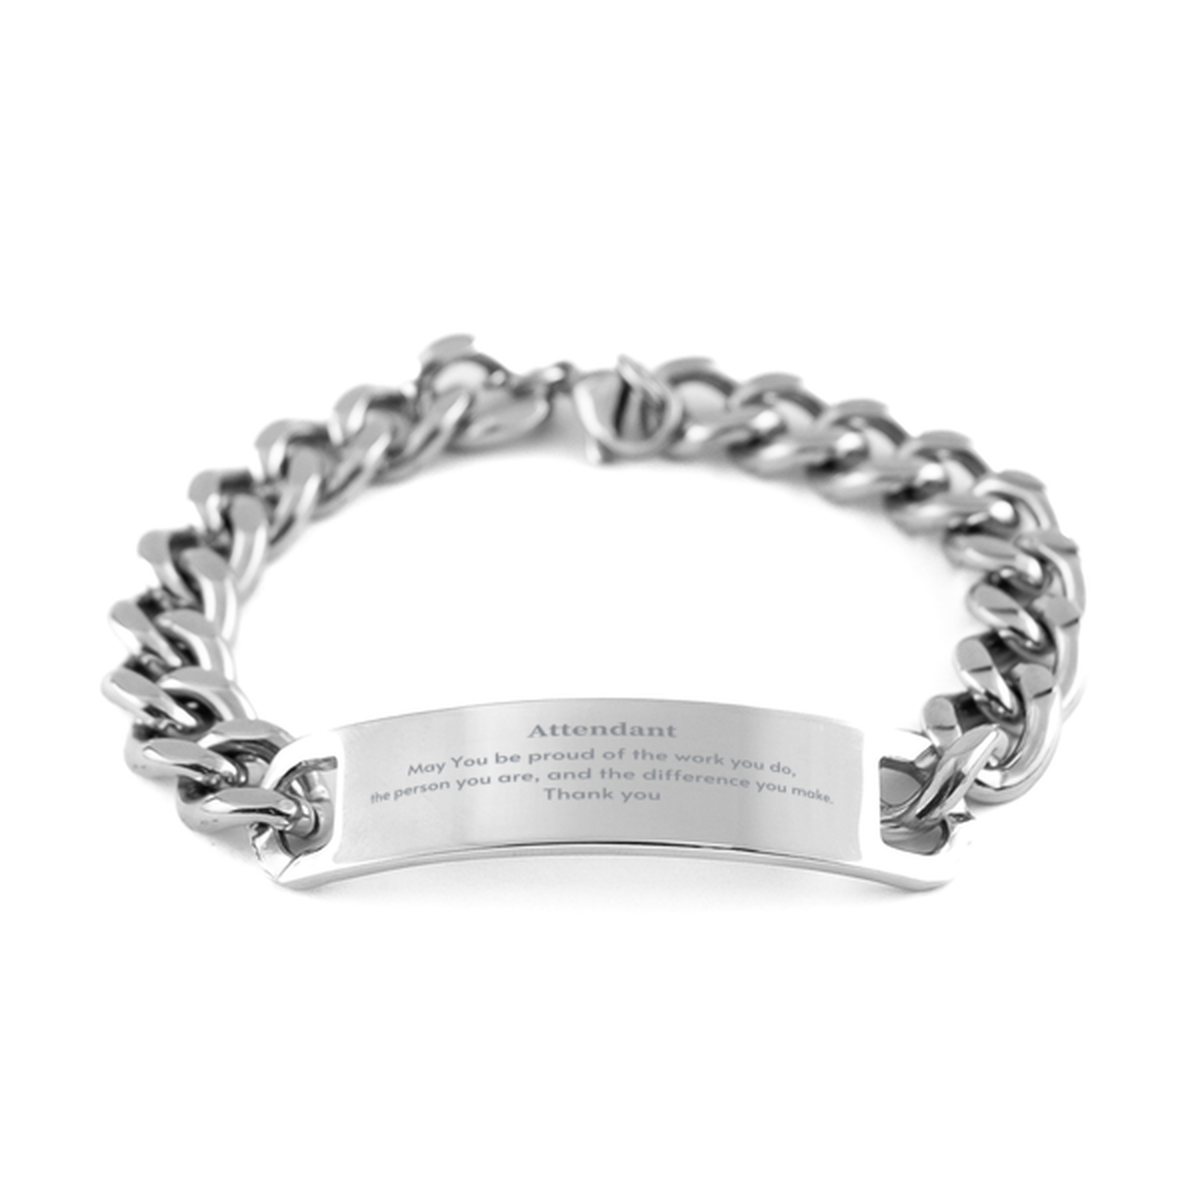 Heartwarming Cuban Chain Stainless Steel Bracelet Retirement Coworkers Gifts for Attendant, Attendant May You be proud of the work you do, the person you are Gifts for Boss Men Women Friends